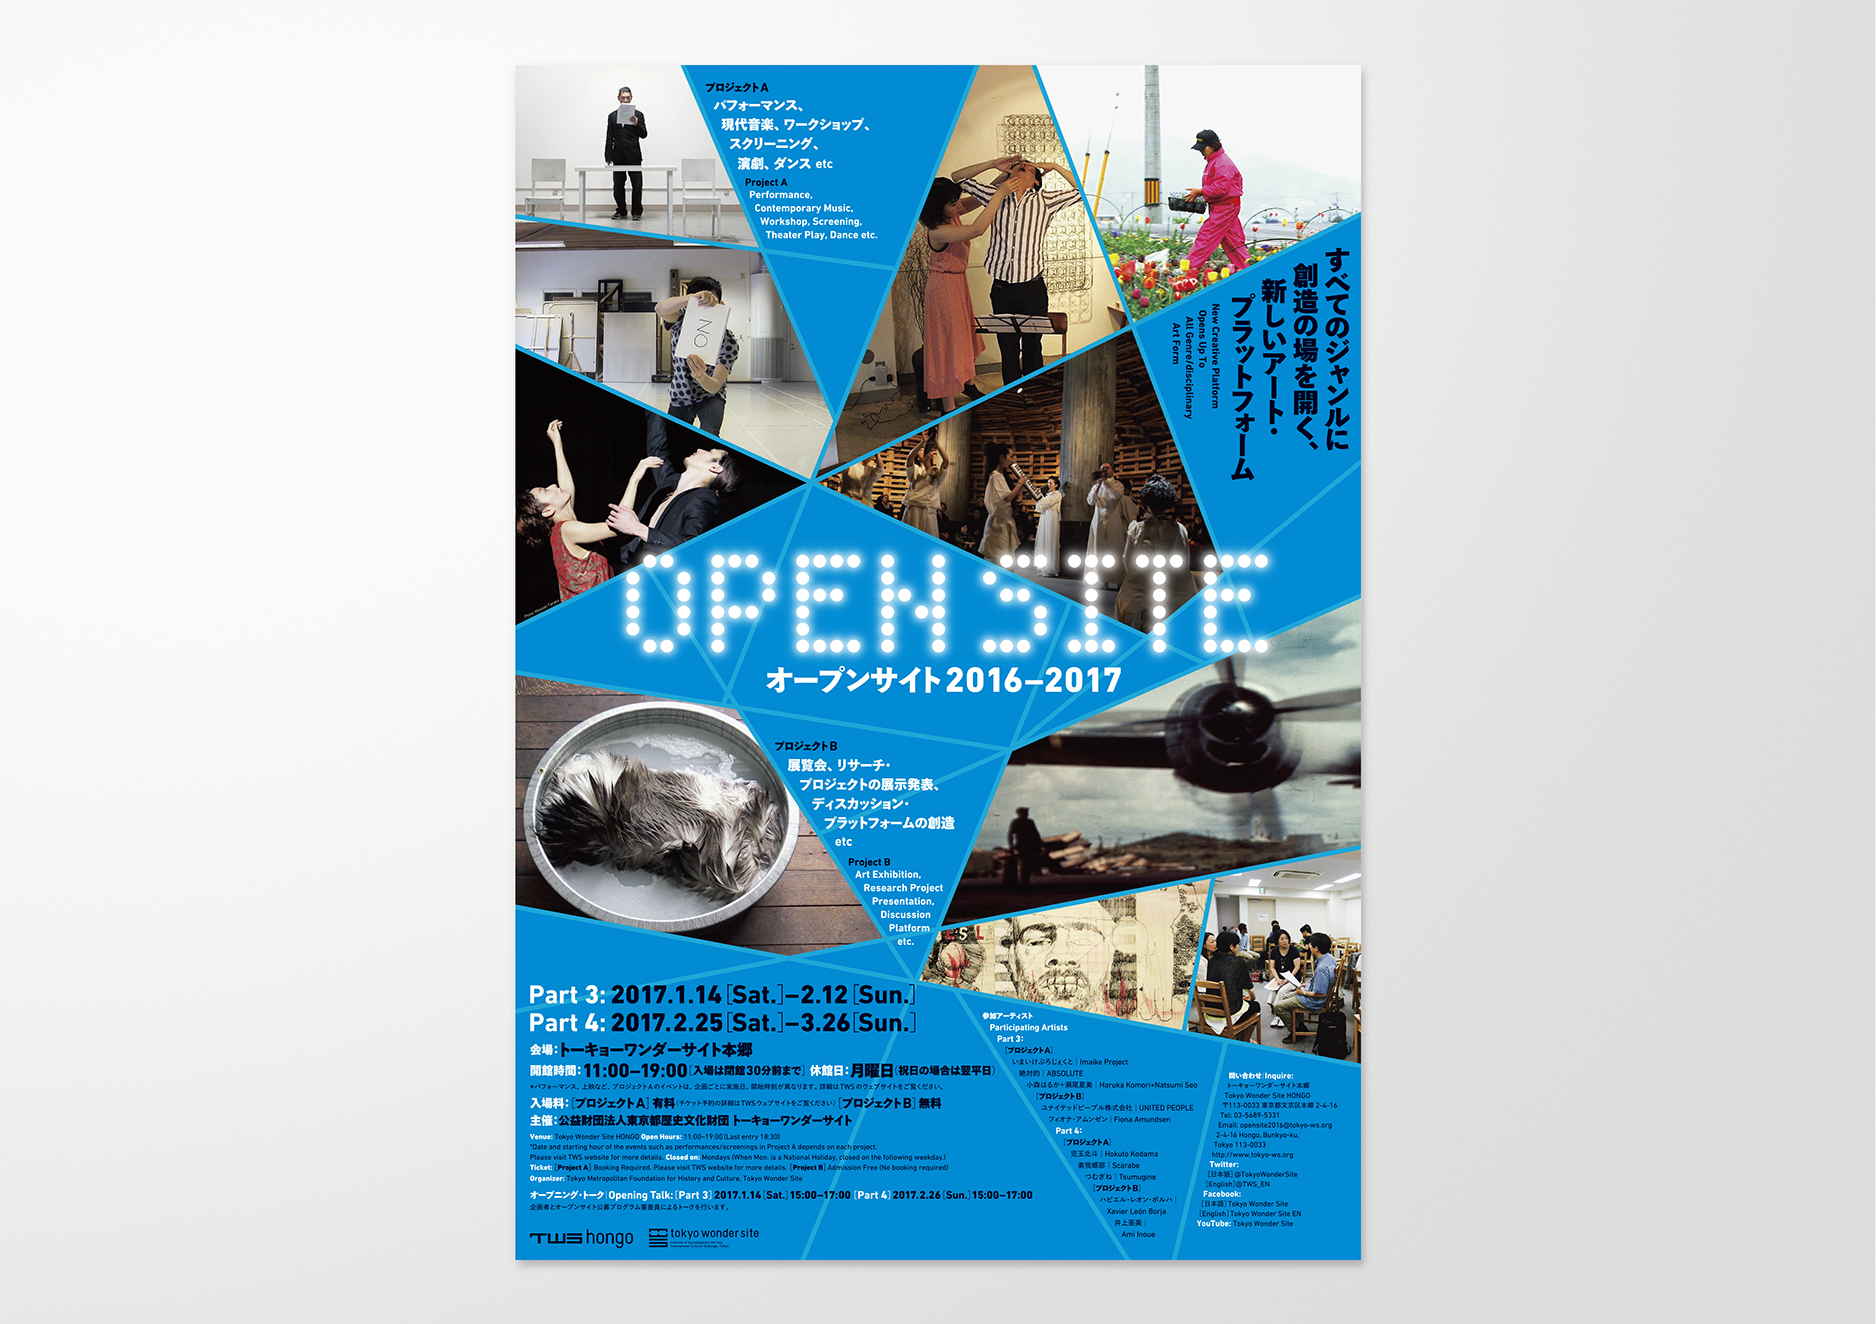 opensite16-17-2_poster_01